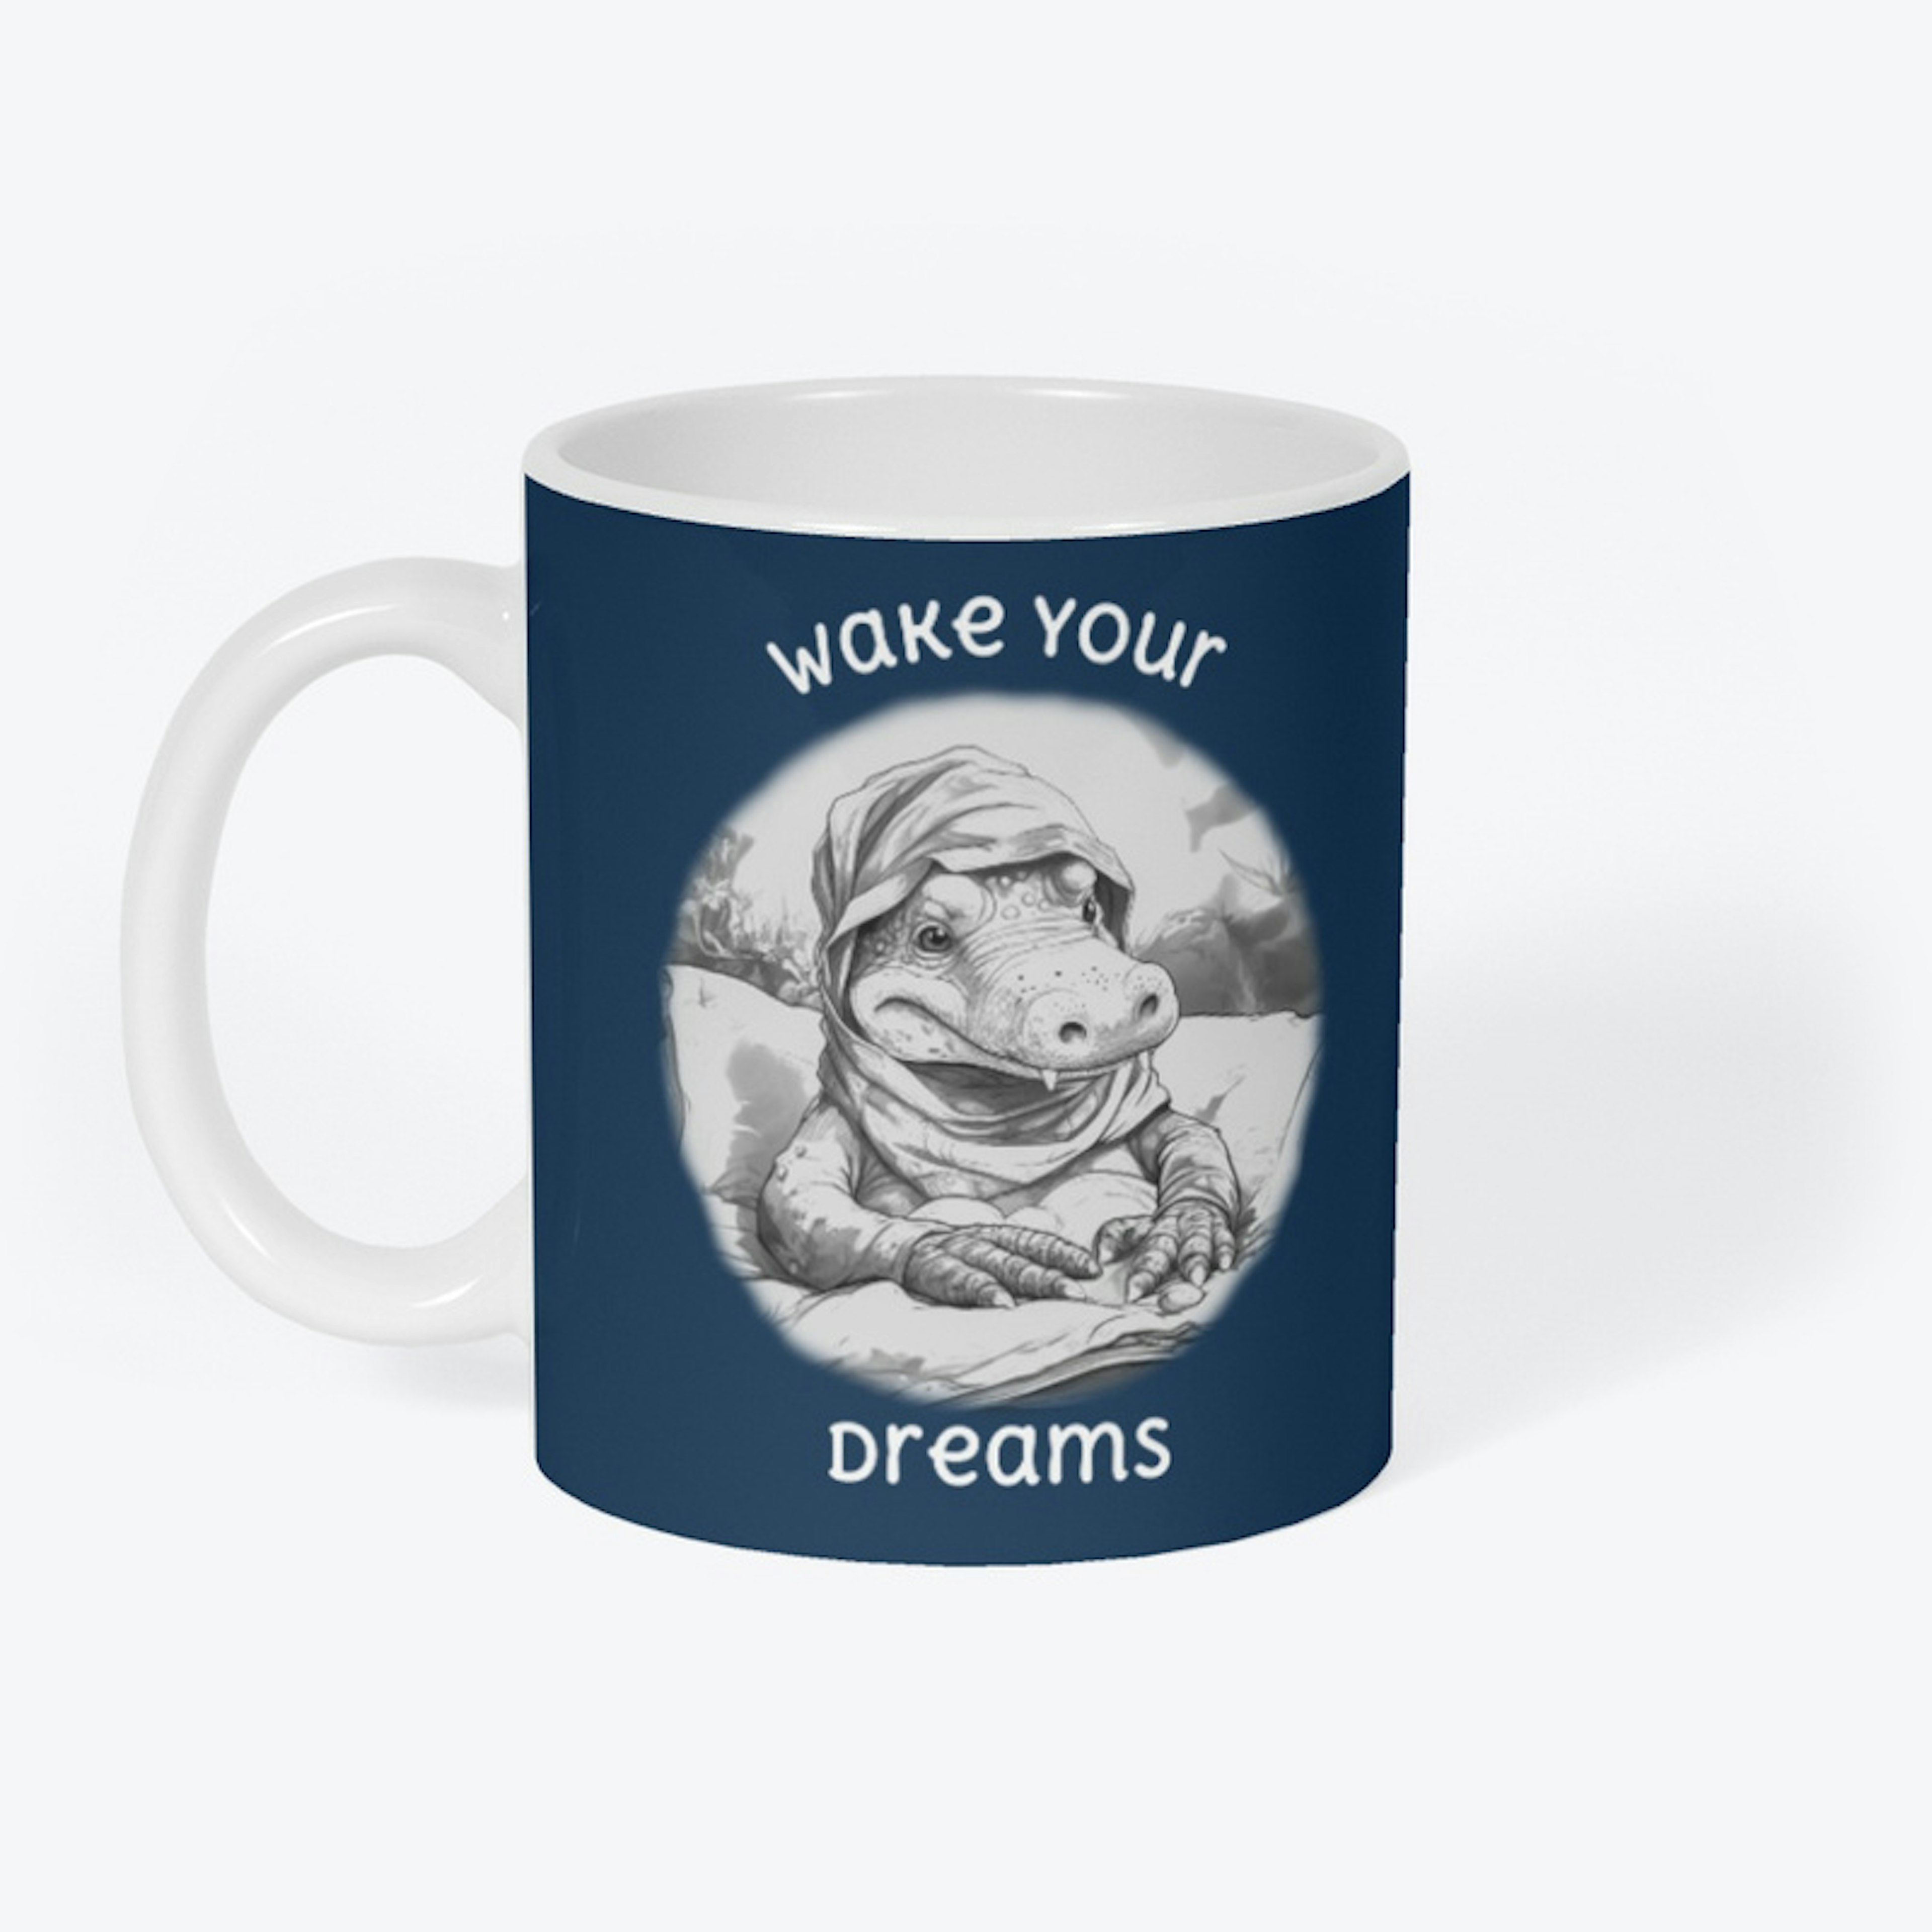 Wake your dreams